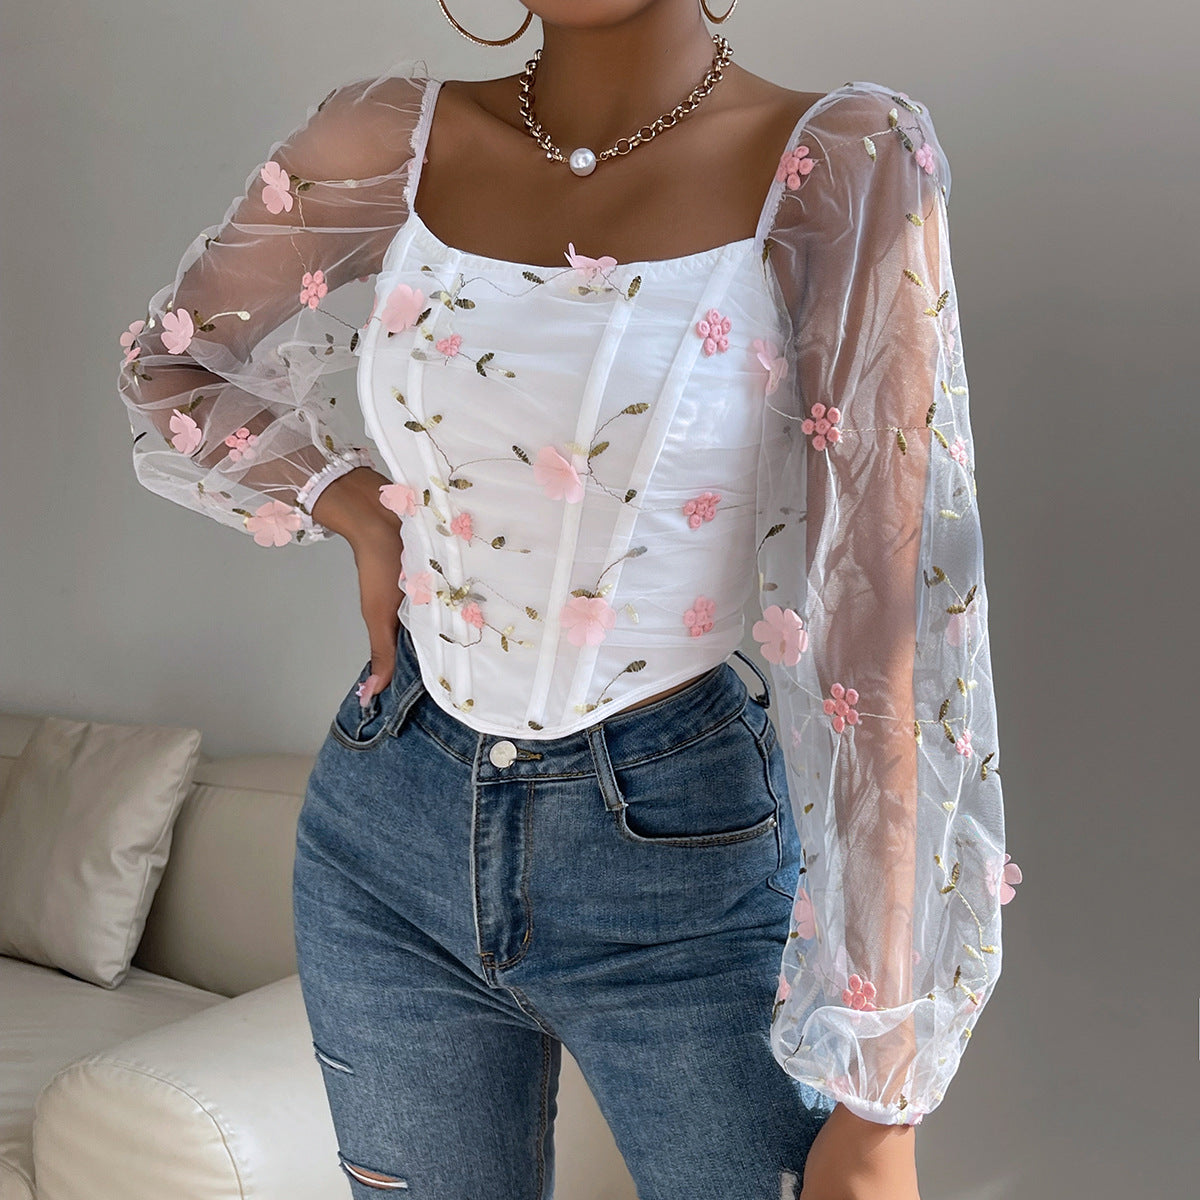 Sexy Mesh See Through Embroidered Floral Double Layer Boning Corset Long Sleeve Top